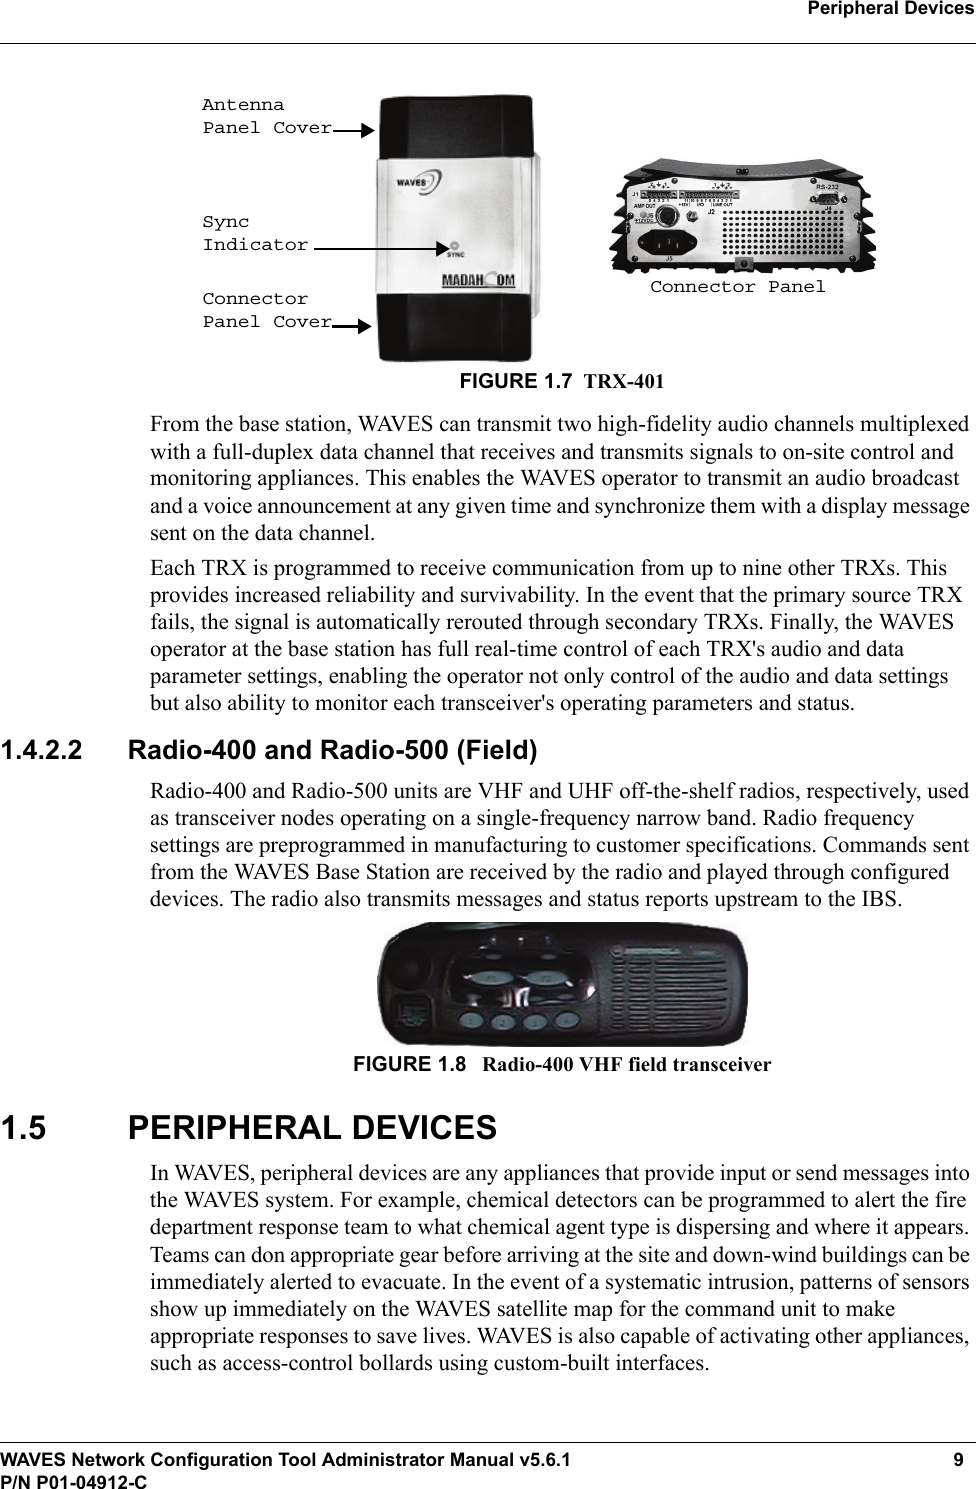 WAVES Network Configuration Tool Administrator Manual v5.6.1 9P/N P01-04912-CPeripheral Devices FIGURE 1.7 TRX-401From the base station, WAVES can transmit two high-fidelity audio channels multiplexed with a full-duplex data channel that receives and transmits signals to on-site control and monitoring appliances. This enables the WAVES operator to transmit an audio broadcast and a voice announcement at any given time and synchronize them with a display message sent on the data channel.Each TRX is programmed to receive communication from up to nine other TRXs. This provides increased reliability and survivability. In the event that the primary source TRX fails, the signal is automatically rerouted through secondary TRXs. Finally, the WAVES operator at the base station has full real-time control of each TRX&apos;s audio and data parameter settings, enabling the operator not only control of the audio and data settings but also ability to monitor each transceiver&apos;s operating parameters and status.1.4.2.2 Radio-400 and Radio-500 (Field)Radio-400 and Radio-500 units are VHF and UHF off-the-shelf radios, respectively, used as transceiver nodes operating on a single-frequency narrow band. Radio frequency settings are preprogrammed in manufacturing to customer specifications. Commands sent from the WAVES Base Station are received by the radio and played through configured devices. The radio also transmits messages and status reports upstream to the IBS.FIGURE 1.8  Radio-400 VHF field transceiver1.5 PERIPHERAL DEVICESIn WAVES, peripheral devices are any appliances that provide input or send messages into the WAVES system. For example, chemical detectors can be programmed to alert the fire department response team to what chemical agent type is dispersing and where it appears. Teams can don appropriate gear before arriving at the site and down-wind buildings can be immediately alerted to evacuate. In the event of a systematic intrusion, patterns of sensors show up immediately on the WAVES satellite map for the command unit to make appropriate responses to save lives. WAVES is also capable of activating other appliances, such as access-control bollards using custom-built interfaces. Connector PanelAntenna Panel CoverSync IndicatorConnector Panel Cover